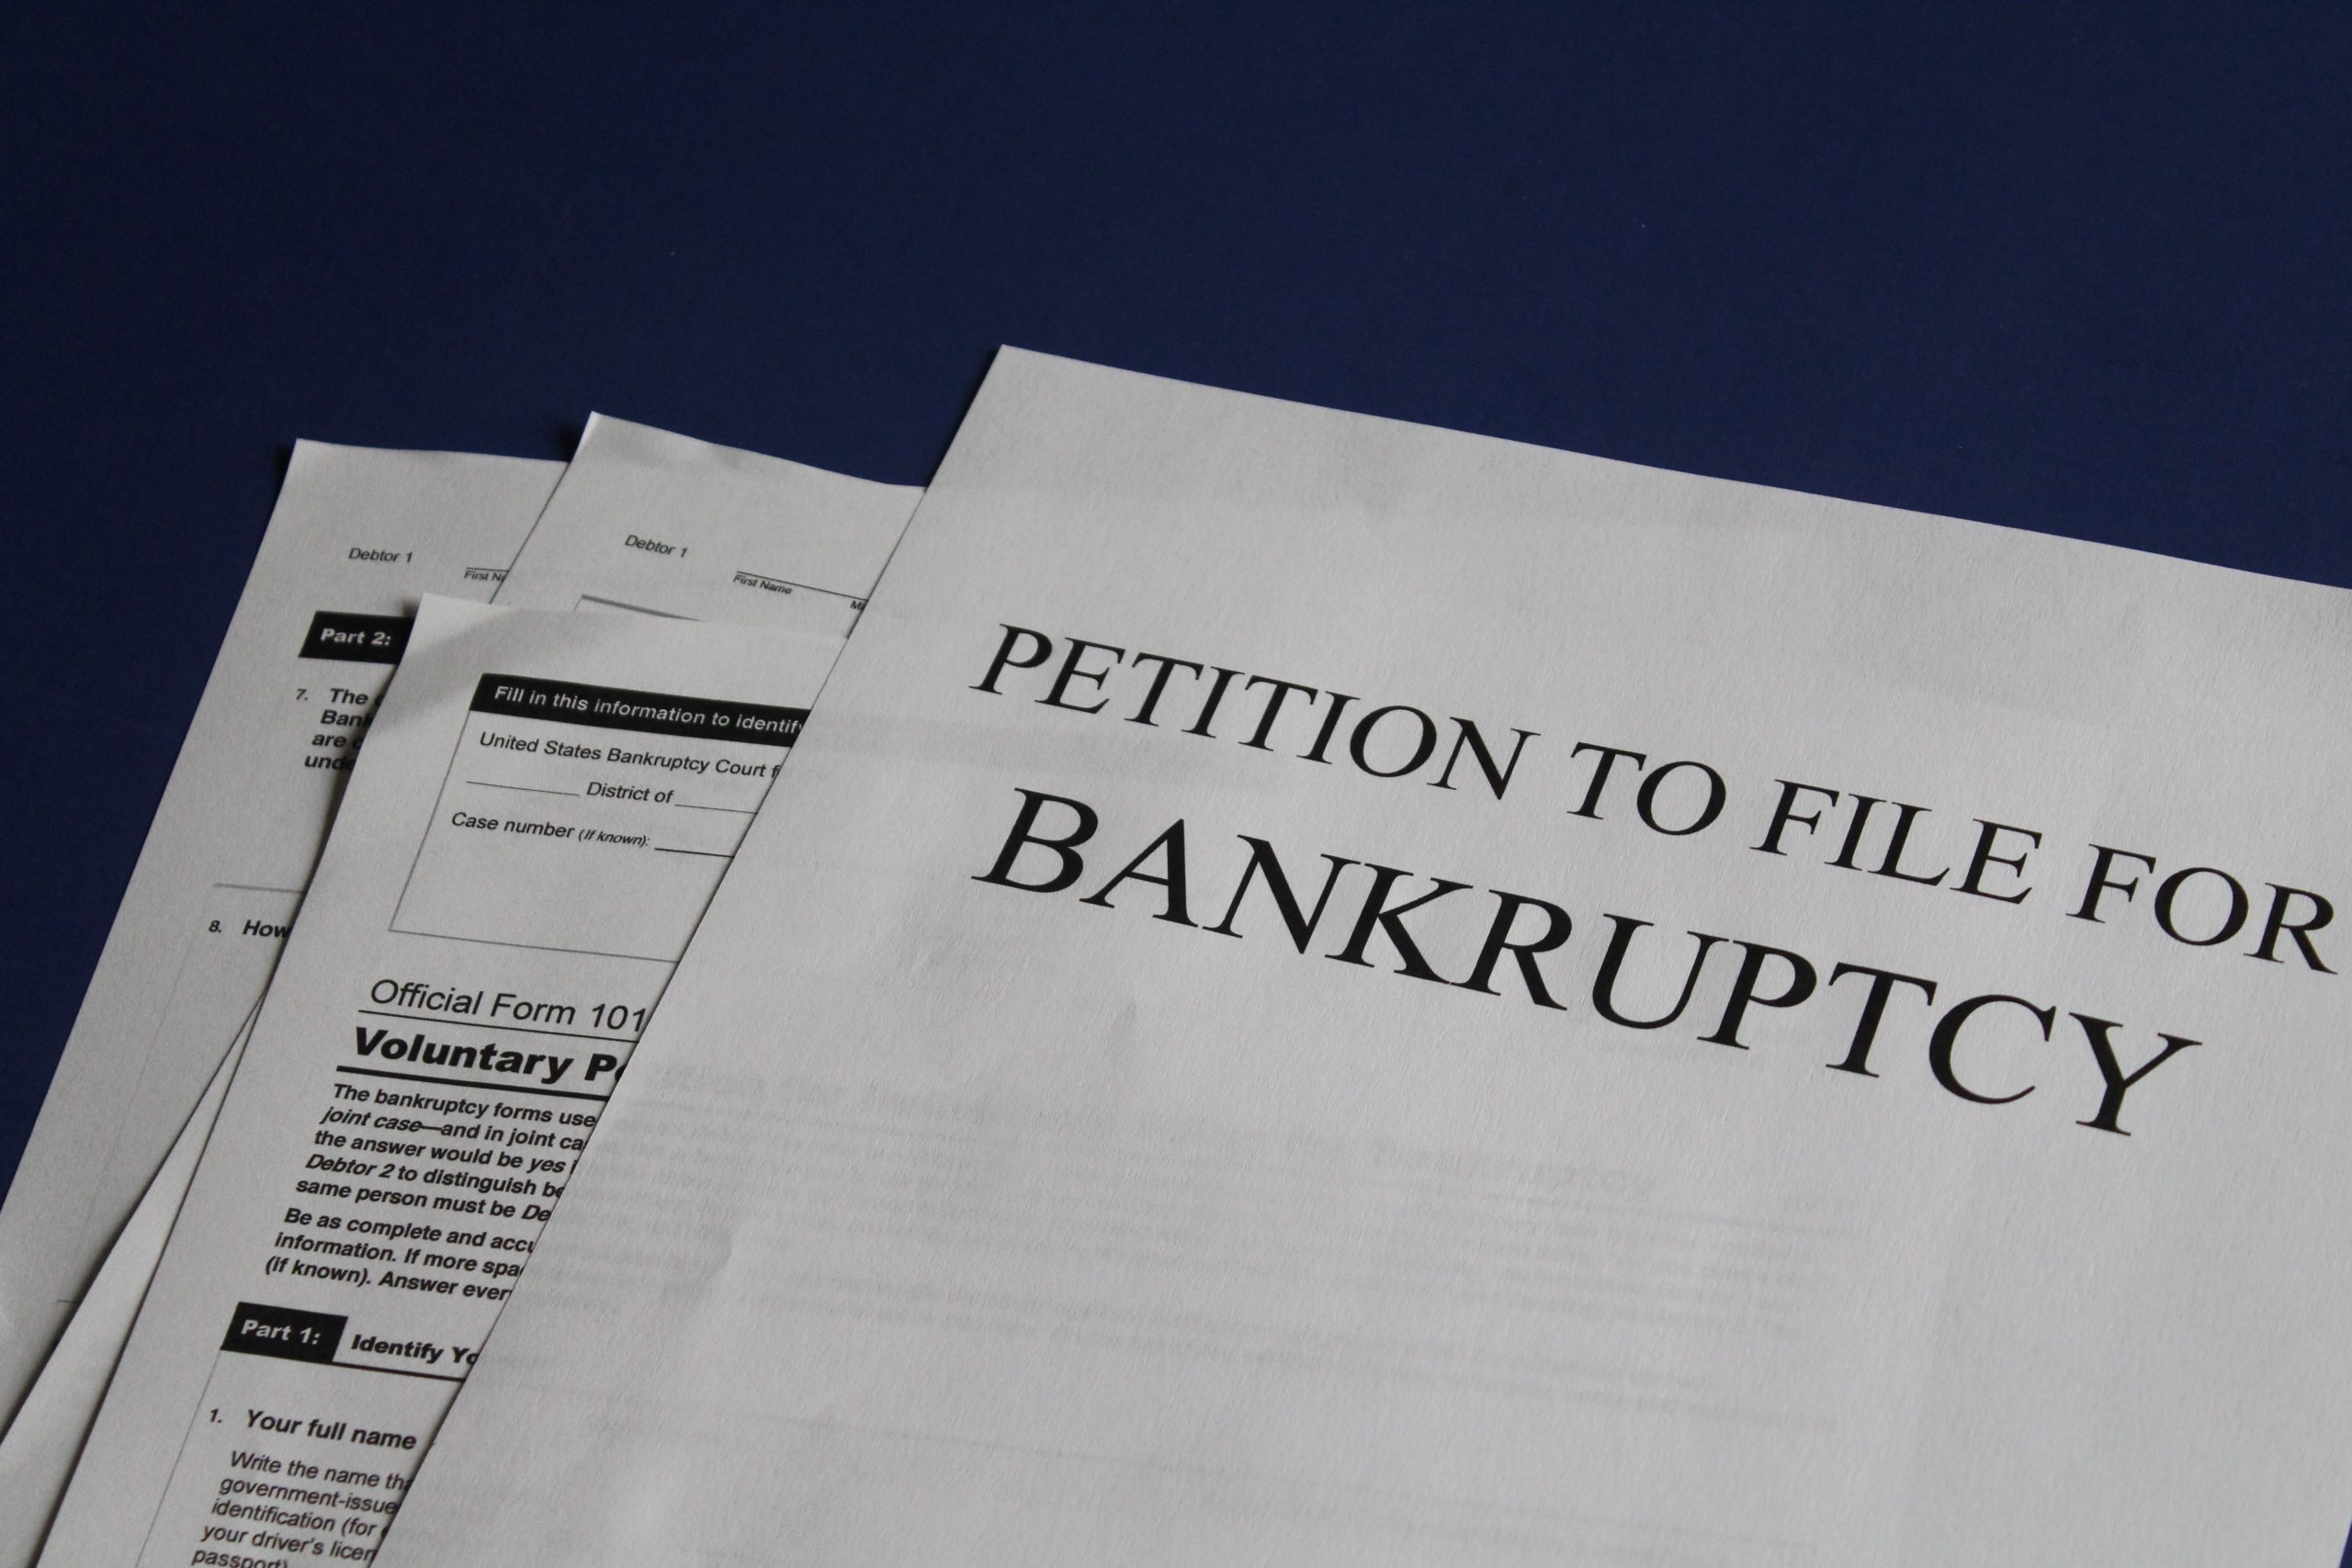 How Can You File For Bankruptcy?